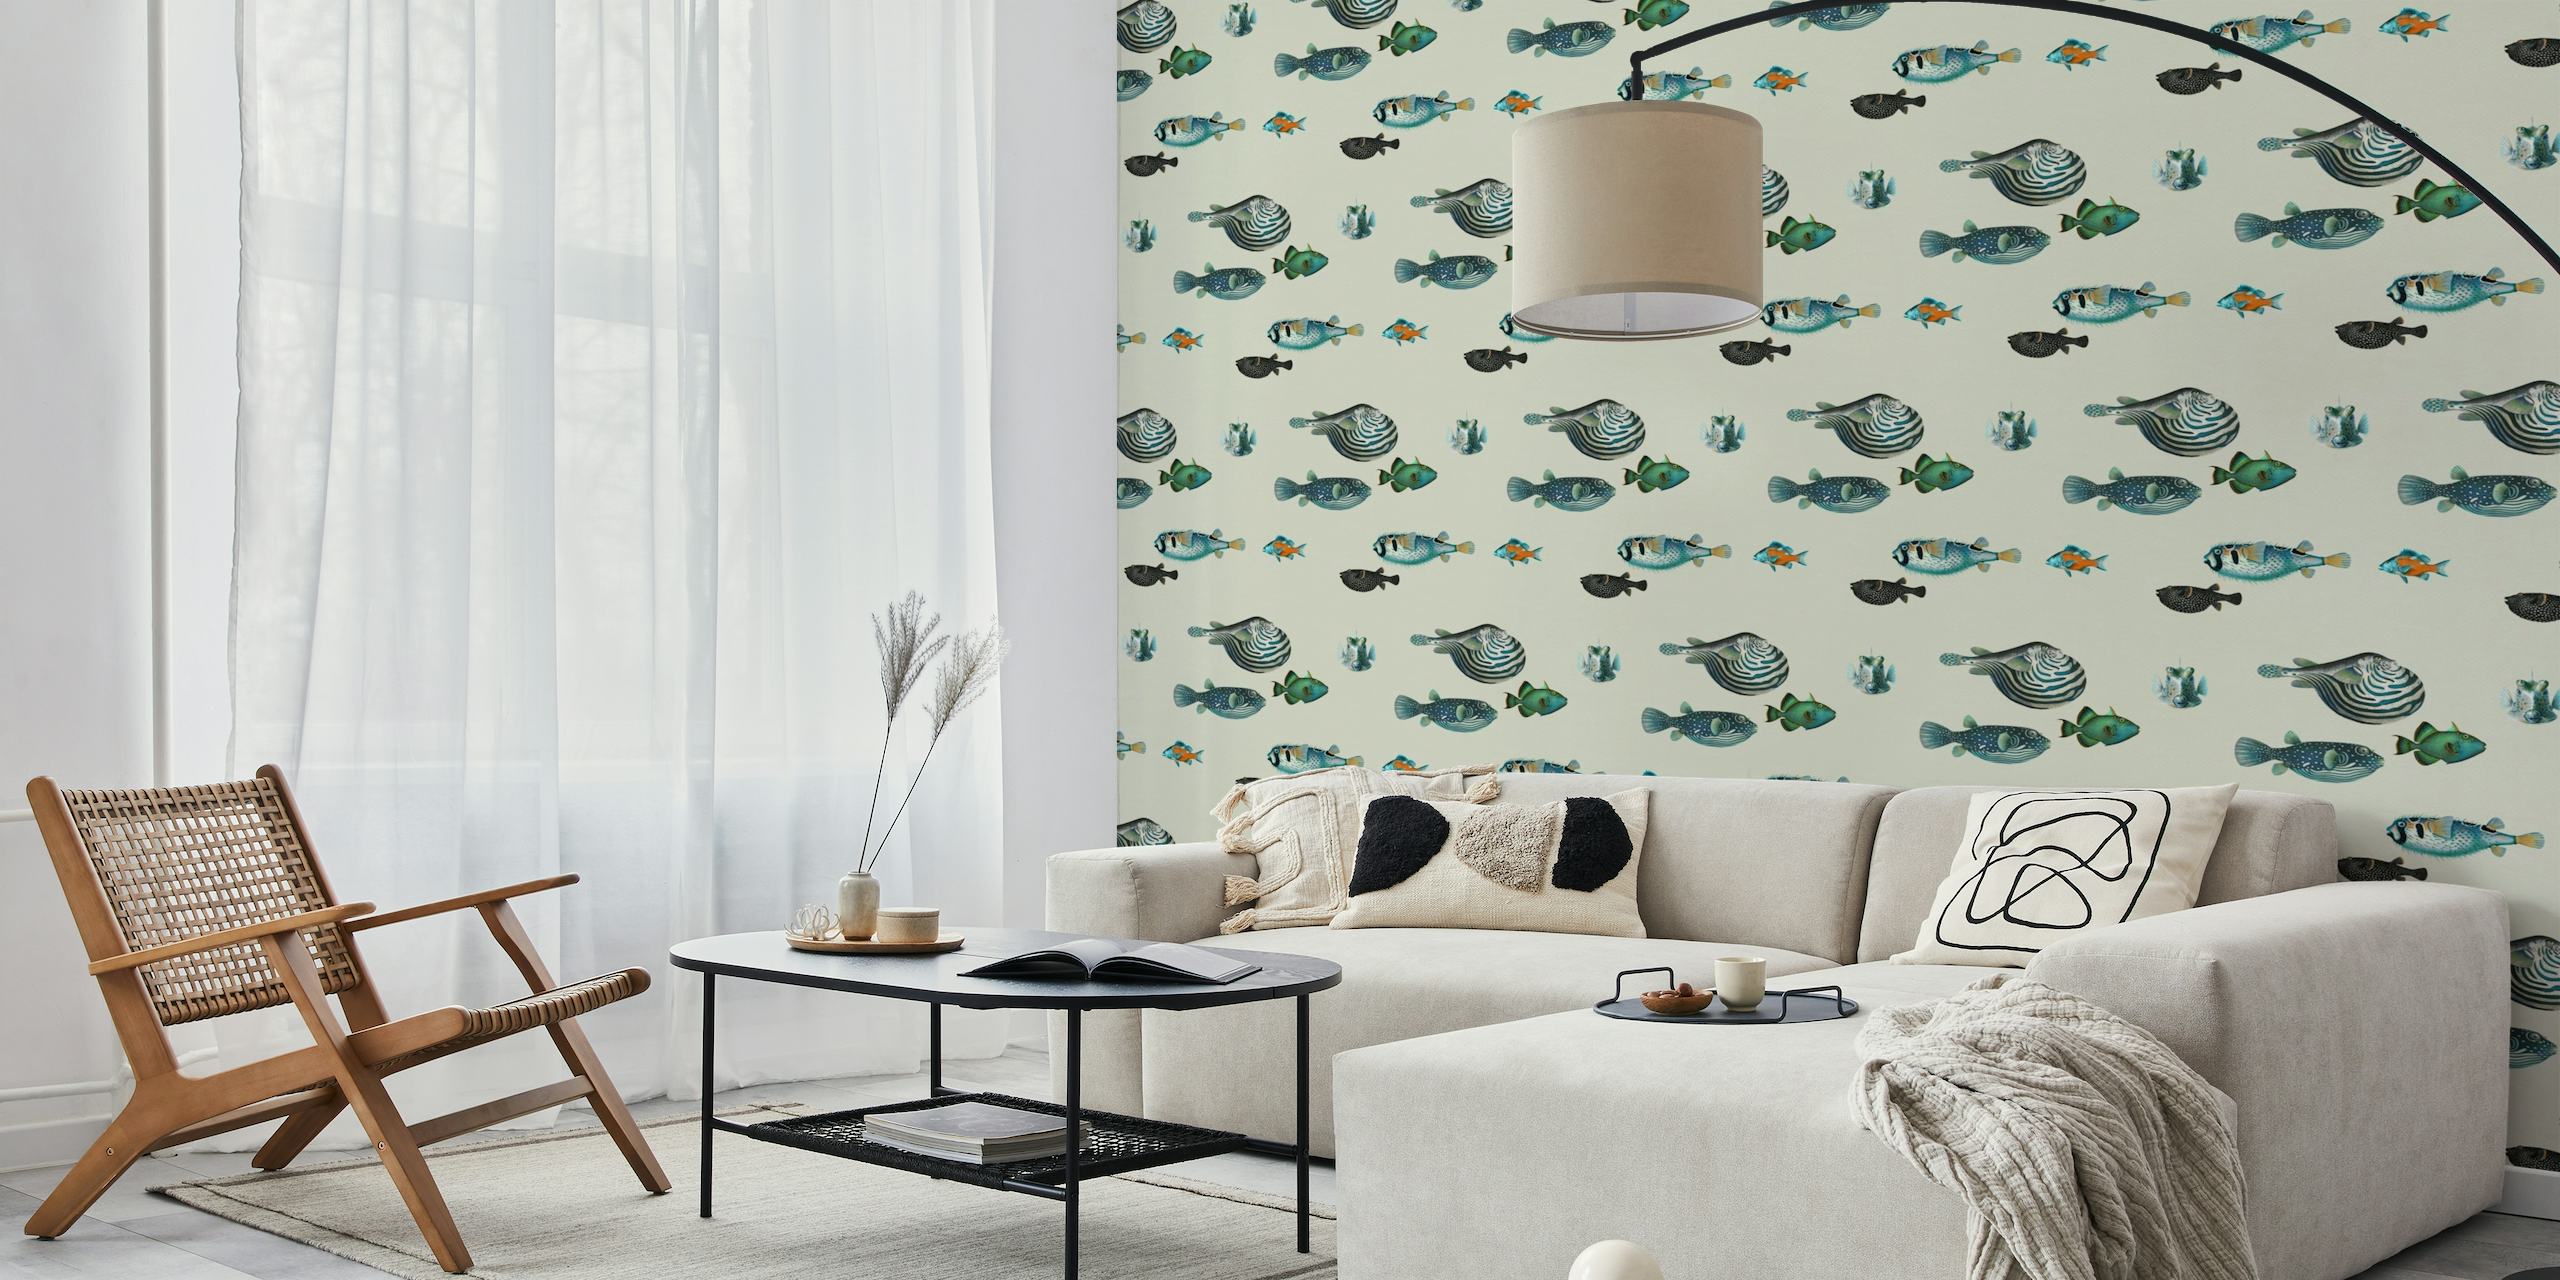 Acquario Fish Pattern wall mural in cream with pastel-colored fish illustrations